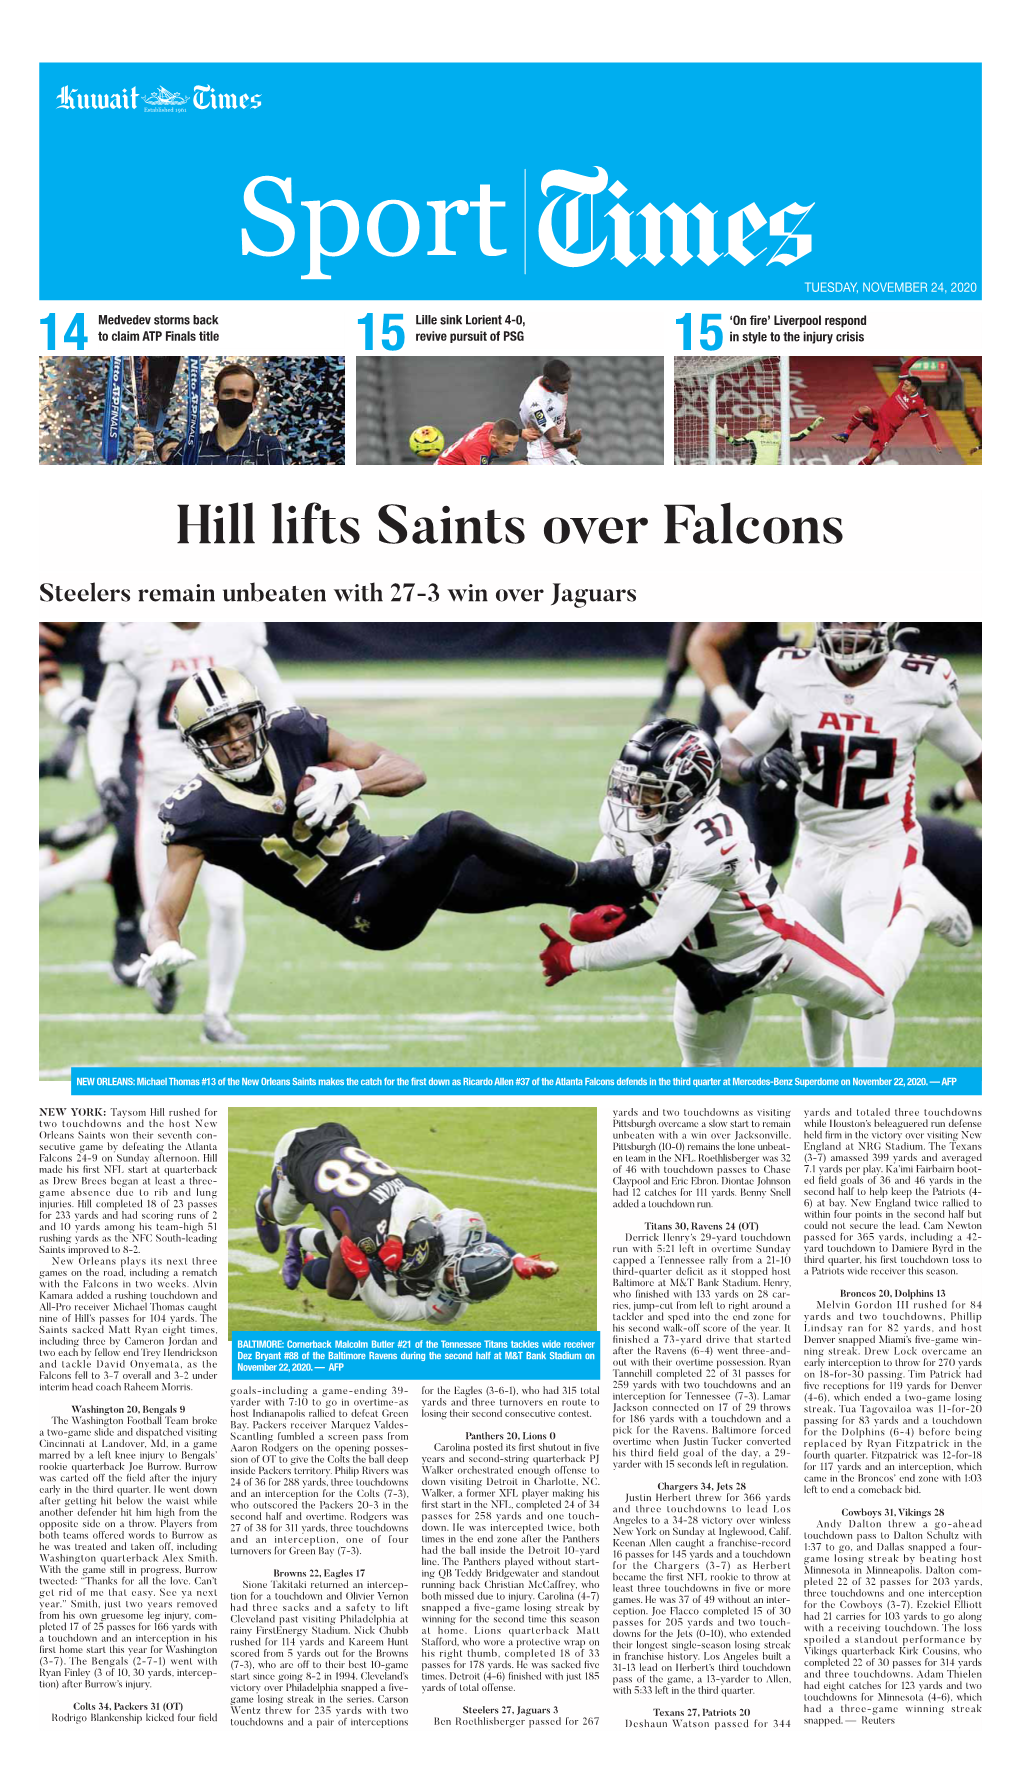 Hill Lifts Saints Over Falcons Steelers Remain Unbeaten with 27-3 Win Over Jaguars